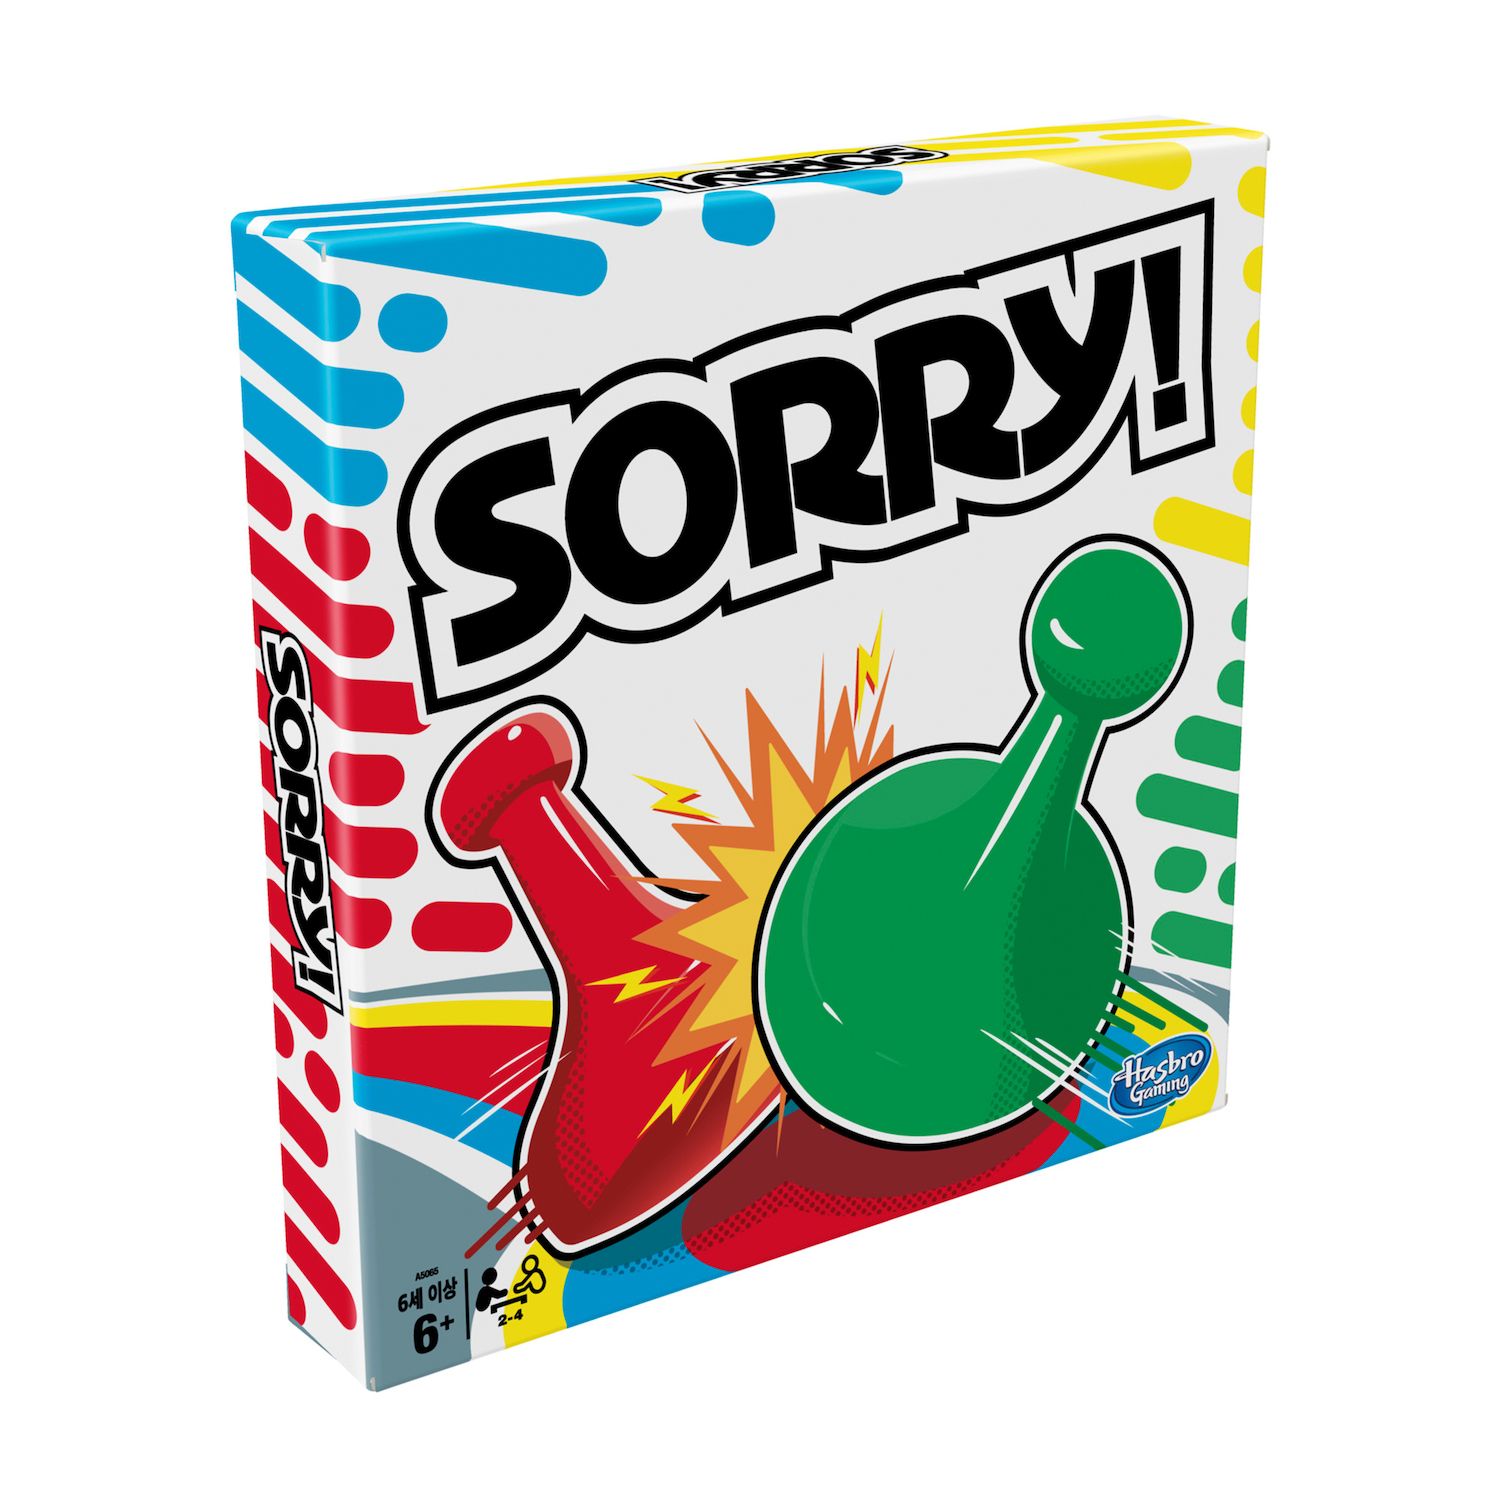 Image for Hasbro Sorry! 2013 Edition Game by at Kohl's.